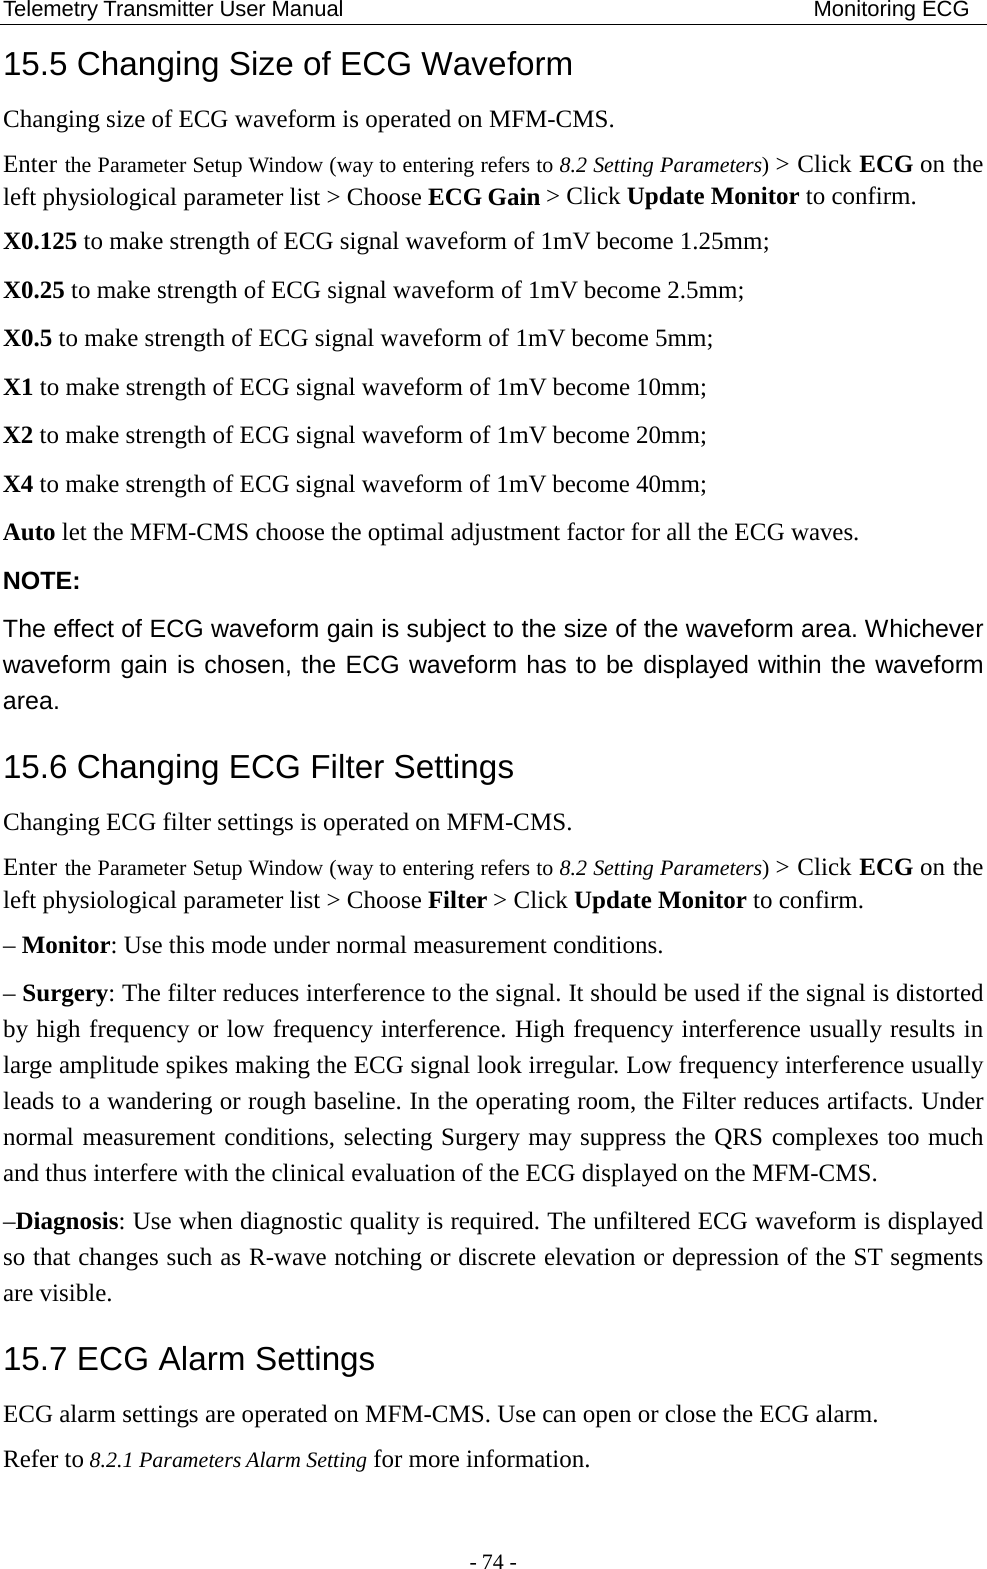 Telemetry Transmitter User Manual                                           Monitoring ECG 15.5 Changing Size of ECG Waveform Changing size of ECG waveform is operated on MFM-CMS.   Enter the Parameter Setup Window (way to entering refers to 8.2 Setting Parameters) &gt; Click ECG on the left physiological parameter list &gt; Choose ECG Gain &gt; Click Update Monitor to confirm. X0.125 to make strength of ECG signal waveform of 1mV become 1.25mm; X0.25 to make strength of ECG signal waveform of 1mV become 2.5mm; X0.5 to make strength of ECG signal waveform of 1mV become 5mm; X1 to make strength of ECG signal waveform of 1mV become 10mm; X2 to make strength of ECG signal waveform of 1mV become 20mm; X4 to make strength of ECG signal waveform of 1mV become 40mm; Auto let the MFM-CMS choose the optimal adjustment factor for all the ECG waves. NOTE: The effect of ECG waveform gain is subject to the size of the waveform area. Whichever waveform gain is chosen, the ECG waveform has to be displayed within the waveform area. 15.6 Changing ECG Filter Settings Changing ECG filter settings is operated on MFM-CMS.   Enter the Parameter Setup Window (way to entering refers to 8.2 Setting Parameters) &gt; Click ECG on the left physiological parameter list &gt; Choose Filter &gt; Click Update Monitor to confirm. – Monitor: Use this mode under normal measurement conditions. – Surgery: The filter reduces interference to the signal. It should be used if the signal is distorted by high frequency or low frequency interference. High frequency interference usually results in large amplitude spikes making the ECG signal look irregular. Low frequency interference usually leads to a wandering or rough baseline. In the operating room, the Filter reduces artifacts. Under normal measurement conditions, selecting Surgery may suppress the QRS complexes too much and thus interfere with the clinical evaluation of the ECG displayed on the MFM-CMS. –Diagnosis: Use when diagnostic quality is required. The unfiltered ECG waveform is displayed so that changes such as R-wave notching or discrete elevation or depression of the ST segments are visible. 15.7 ECG Alarm Settings ECG alarm settings are operated on MFM-CMS. Use can open or close the ECG alarm. Refer to 8.2.1 Parameters Alarm Setting for more information. - 74 - 